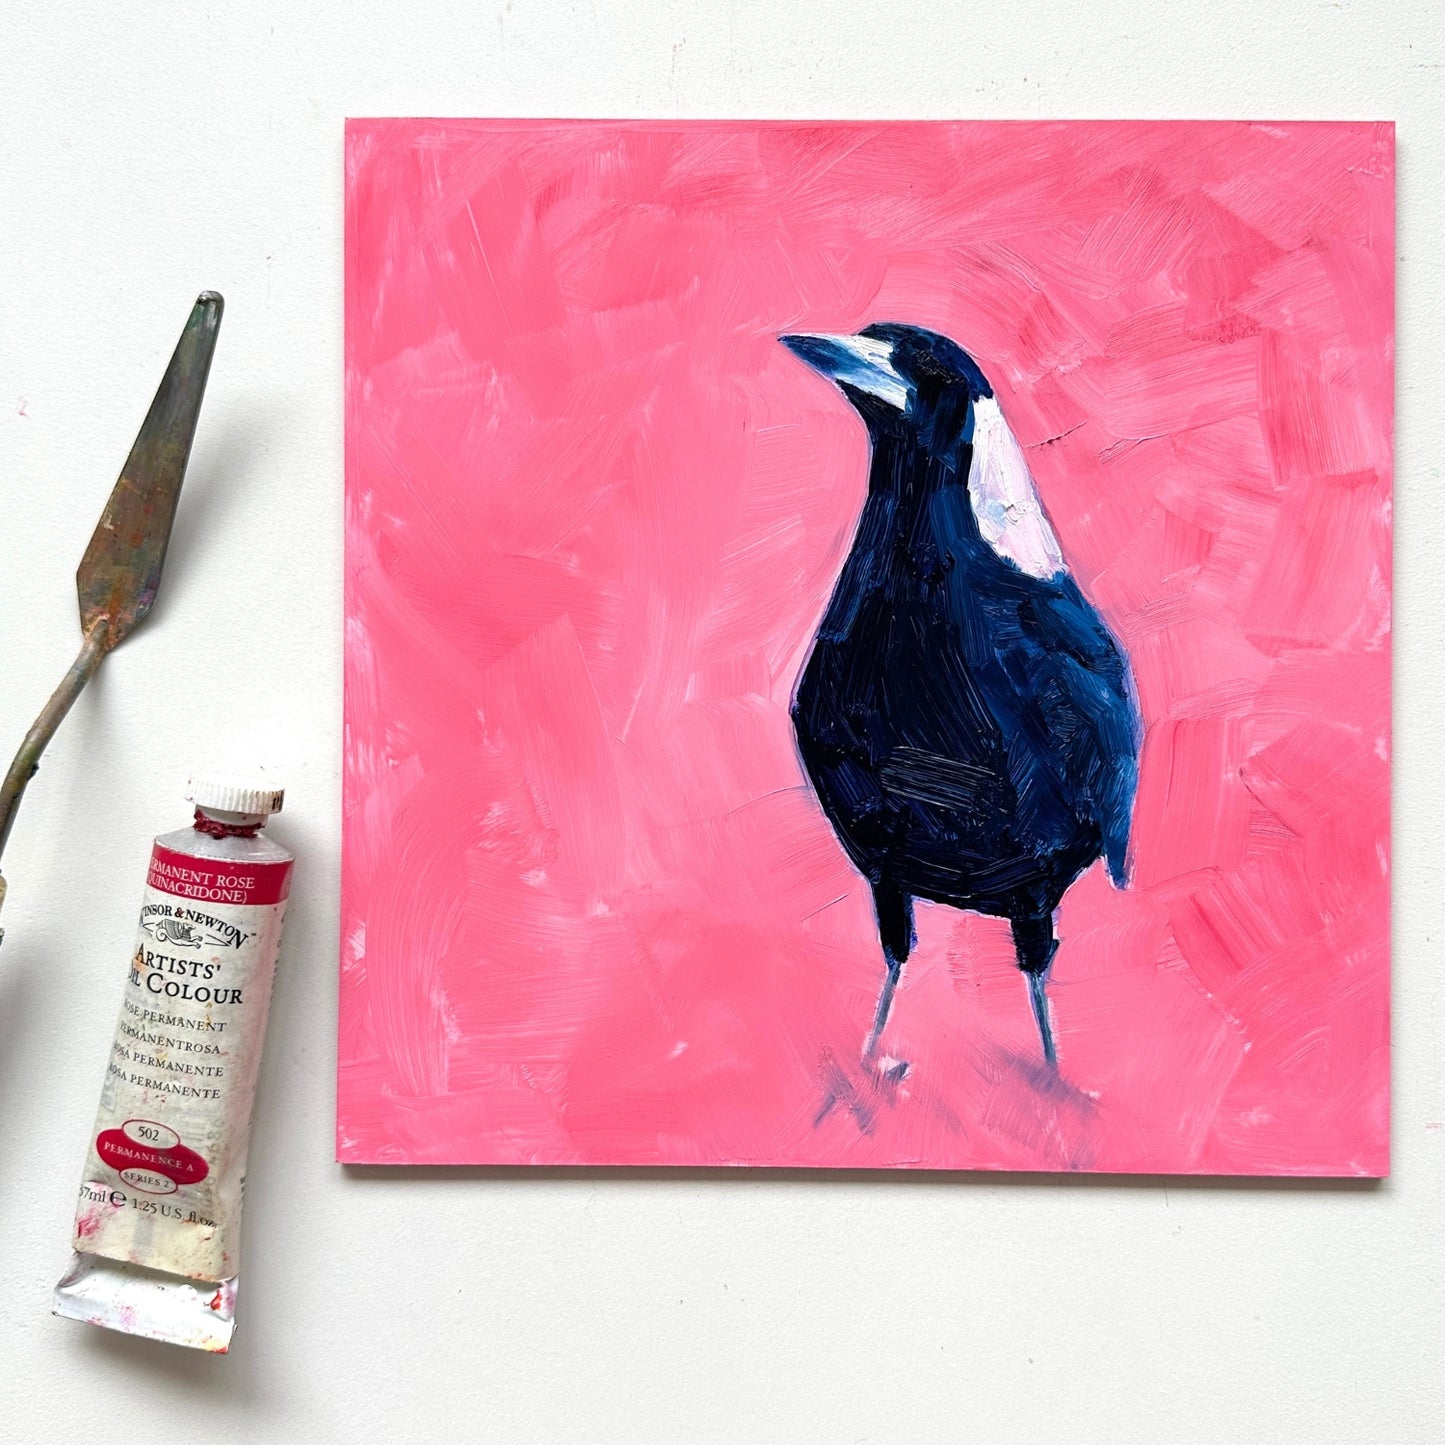 lifestyle photo of a fine art contemporary original oil painting of a navy blue and white magpie on a textured pink background on a white desk. there is an oil paint tube and a palette knife next to it